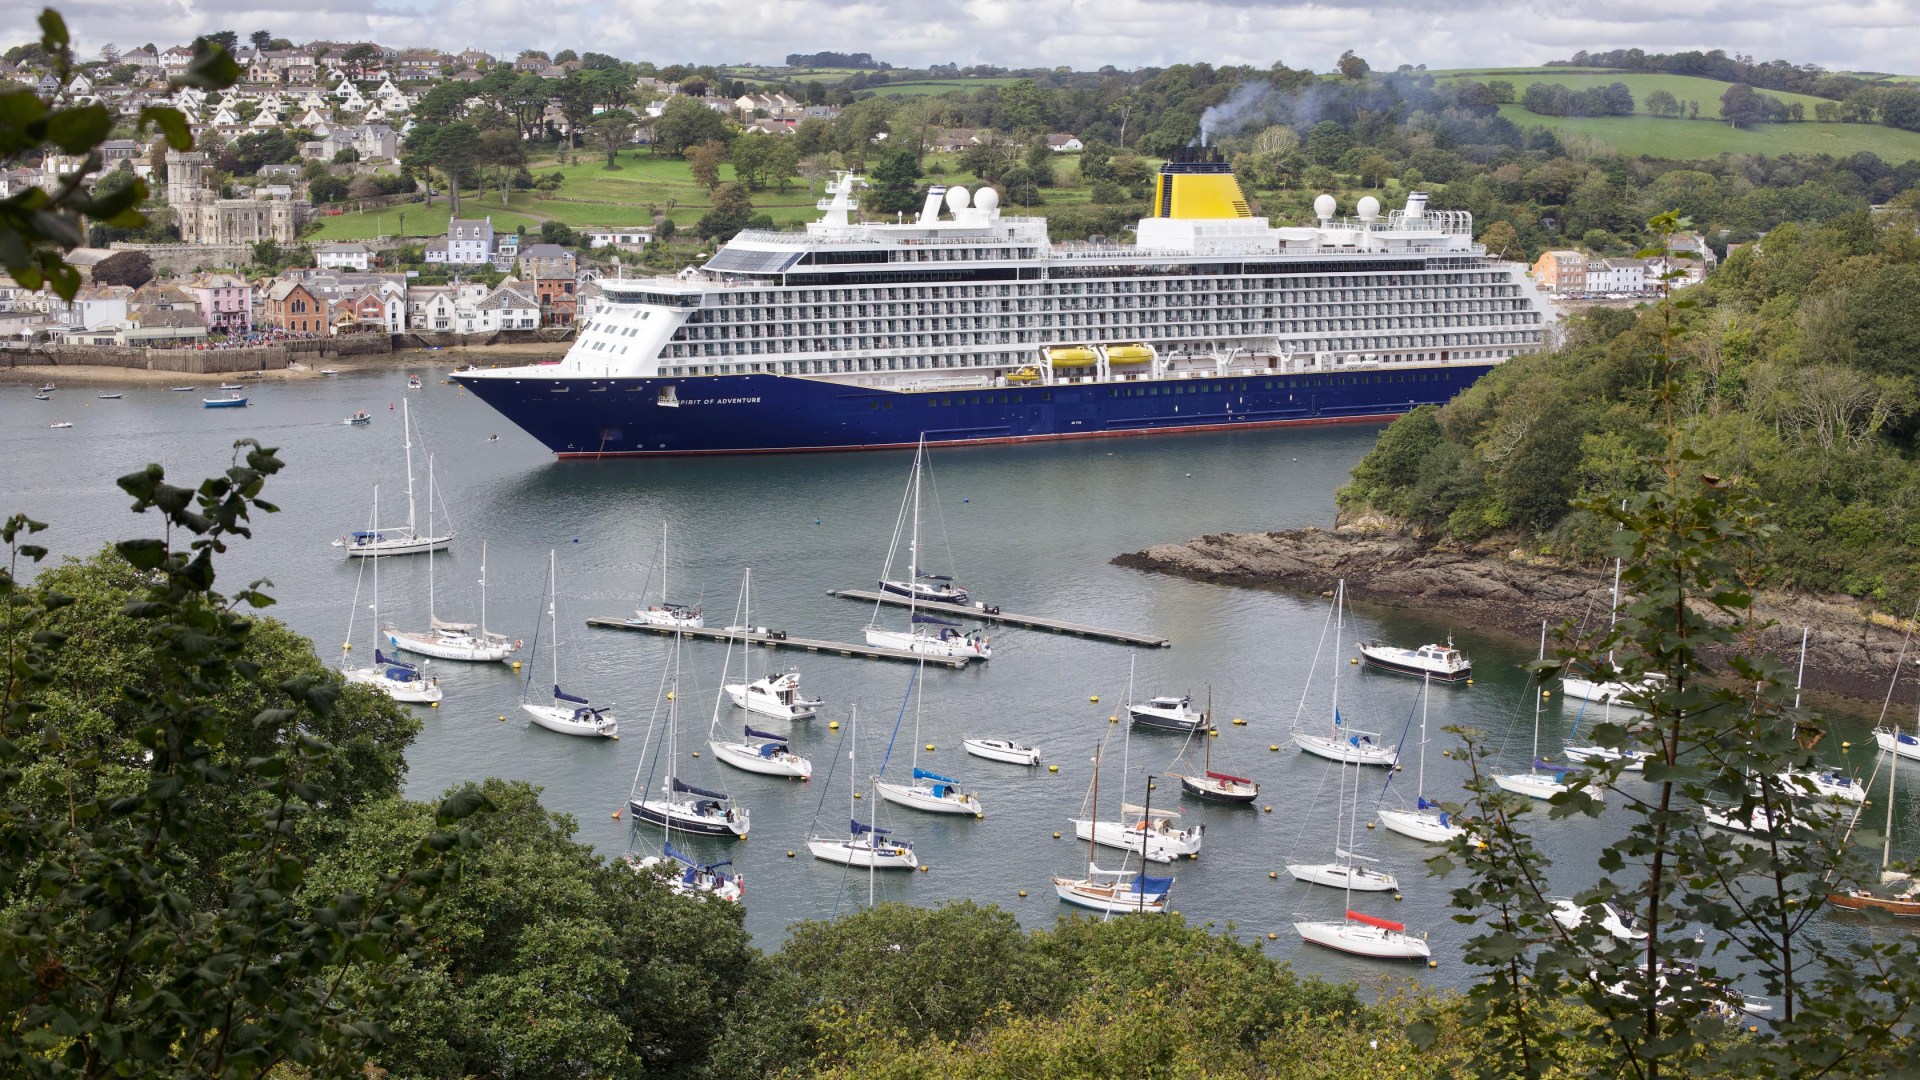 Our seaside village is being ruined by an ‘eyesore’ cruise ship – it’s far too big for our little area